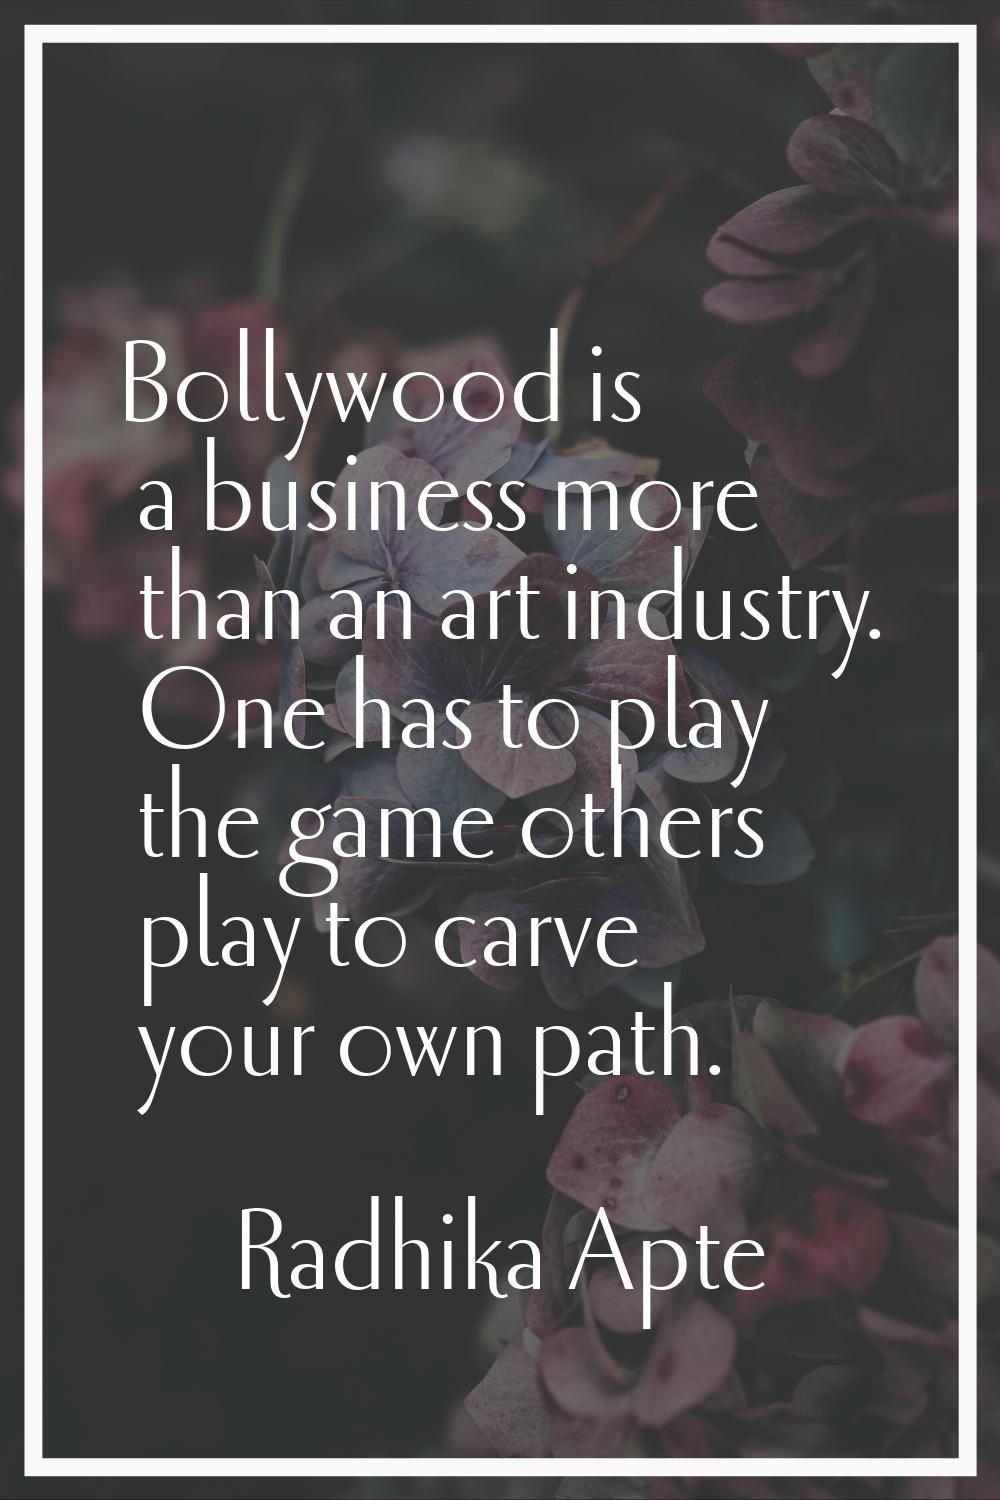 Bollywood is a business more than an art industry. One has to play the game others play to carve yo